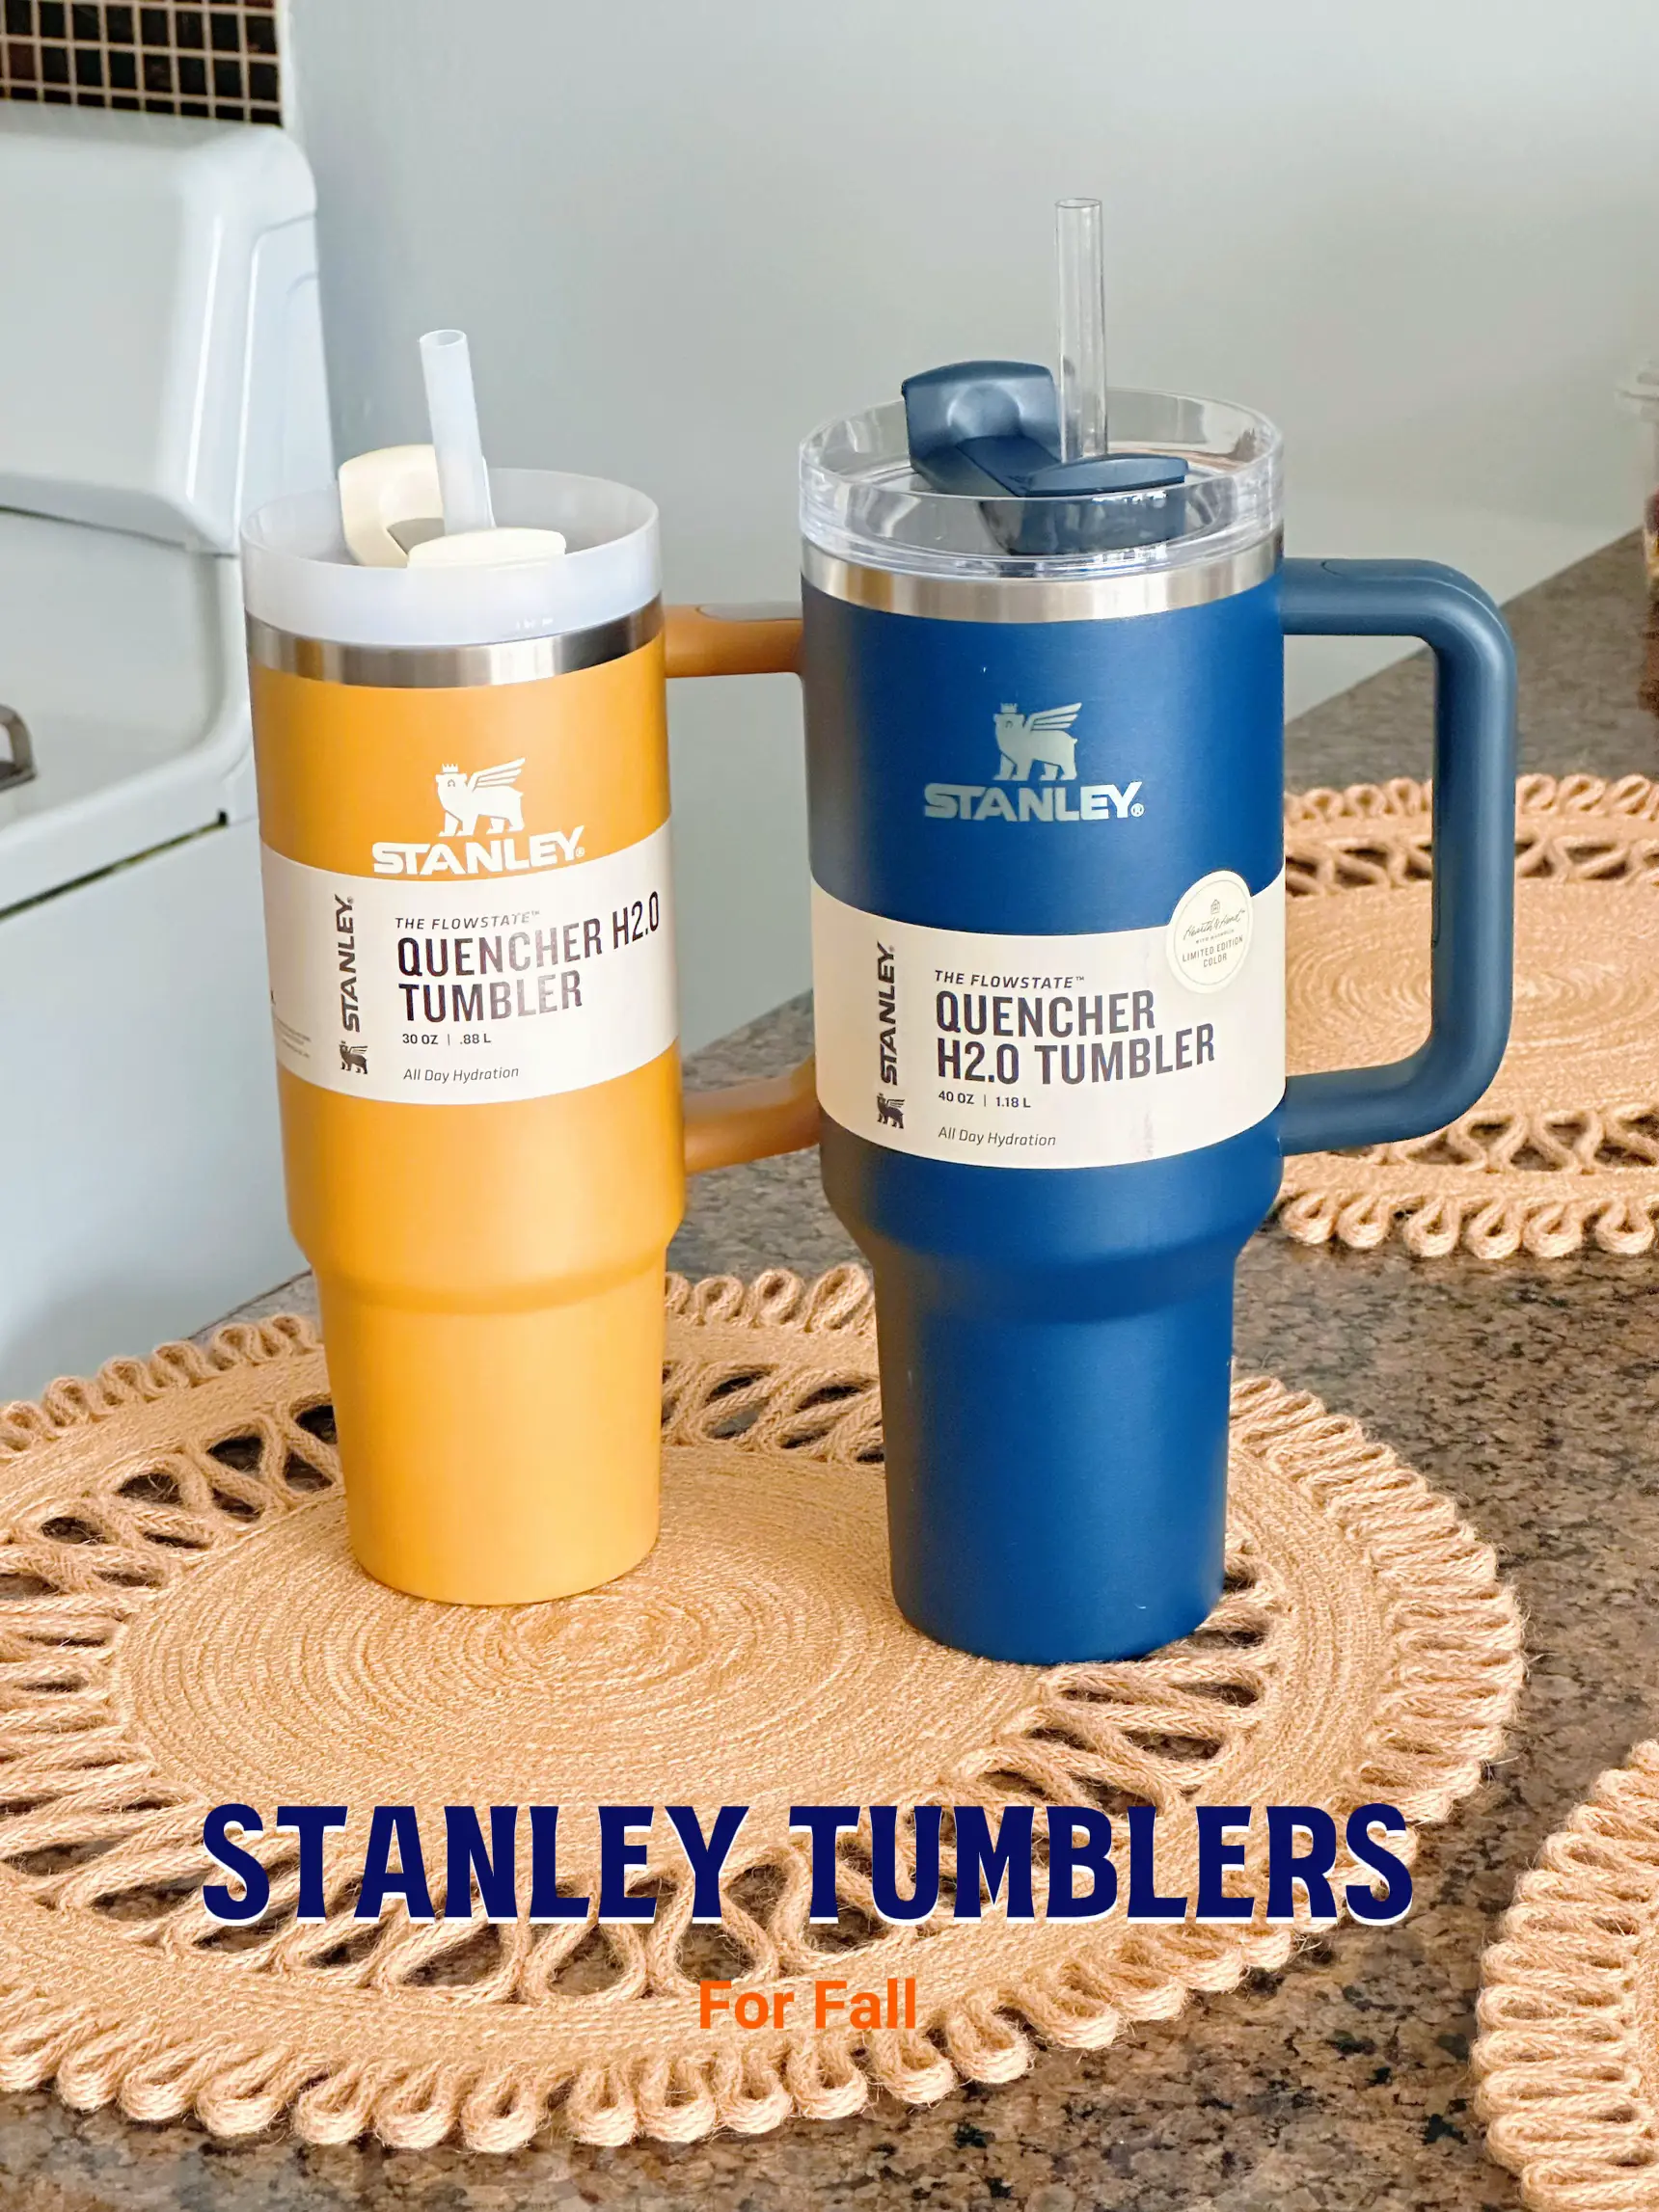 Target's Magnolia brand dropped new Stanley colors and more